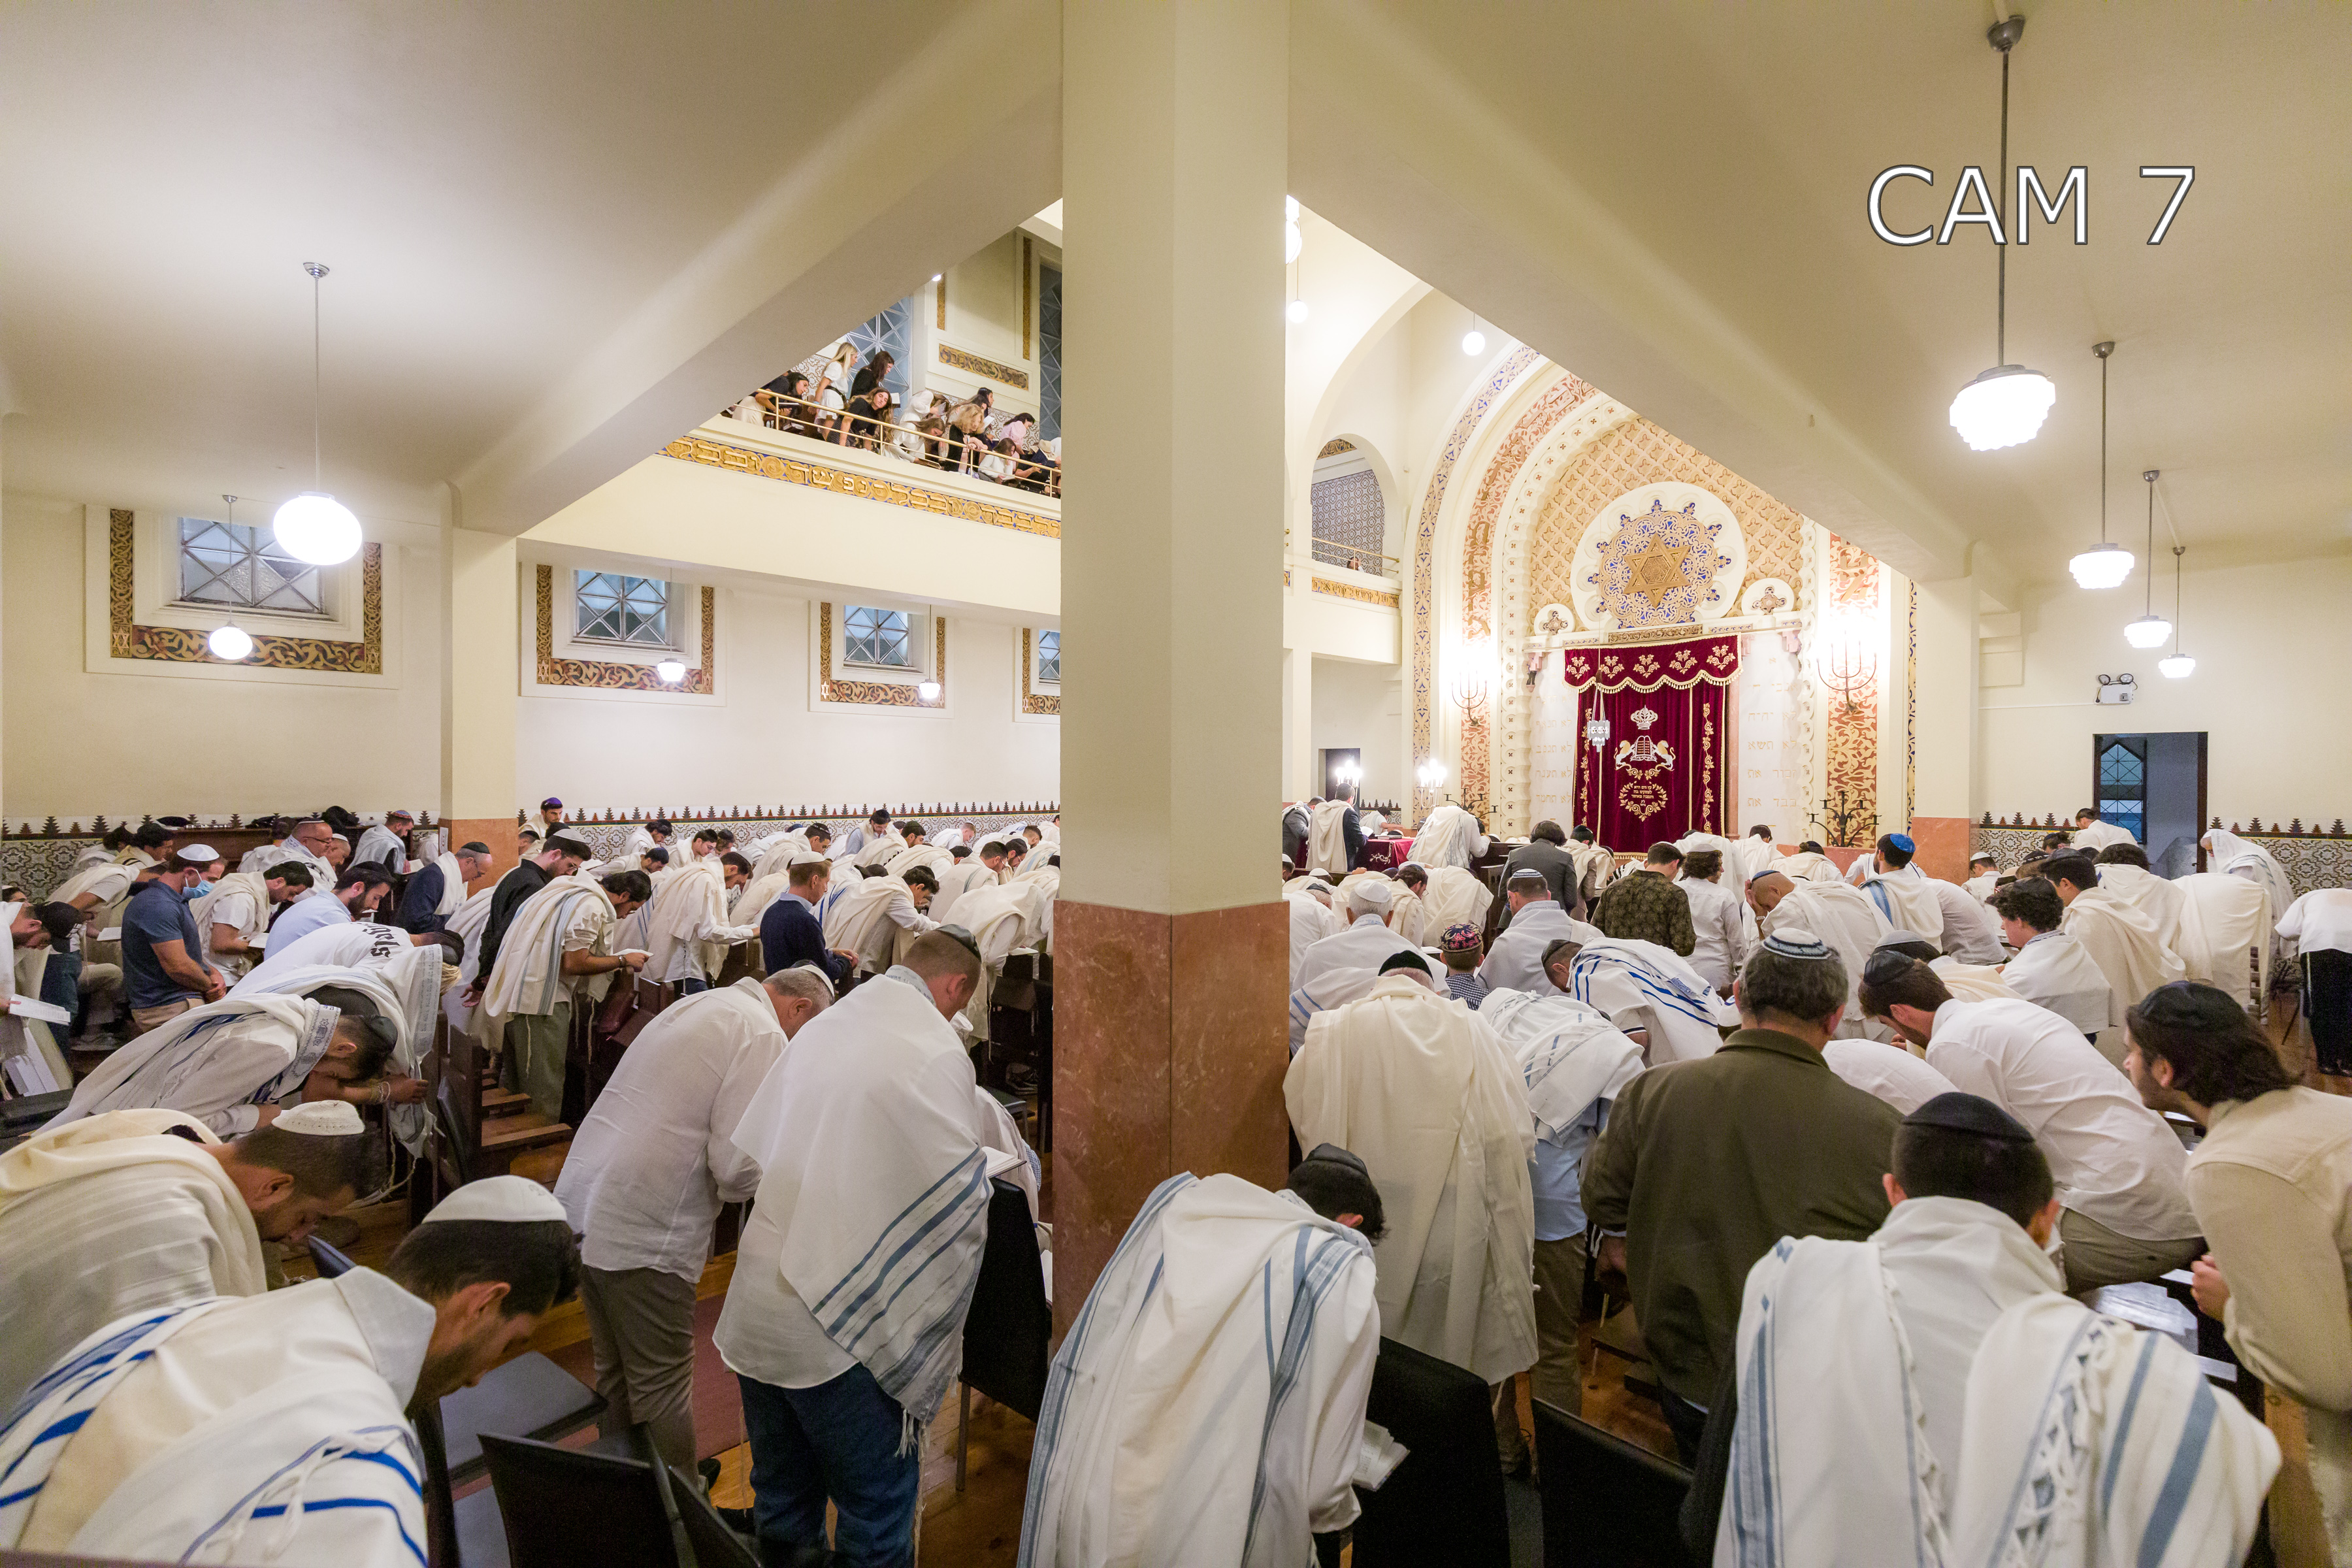 Jewish Community of Oporto inaugurates new Synagogue and shares images of activities in 2022